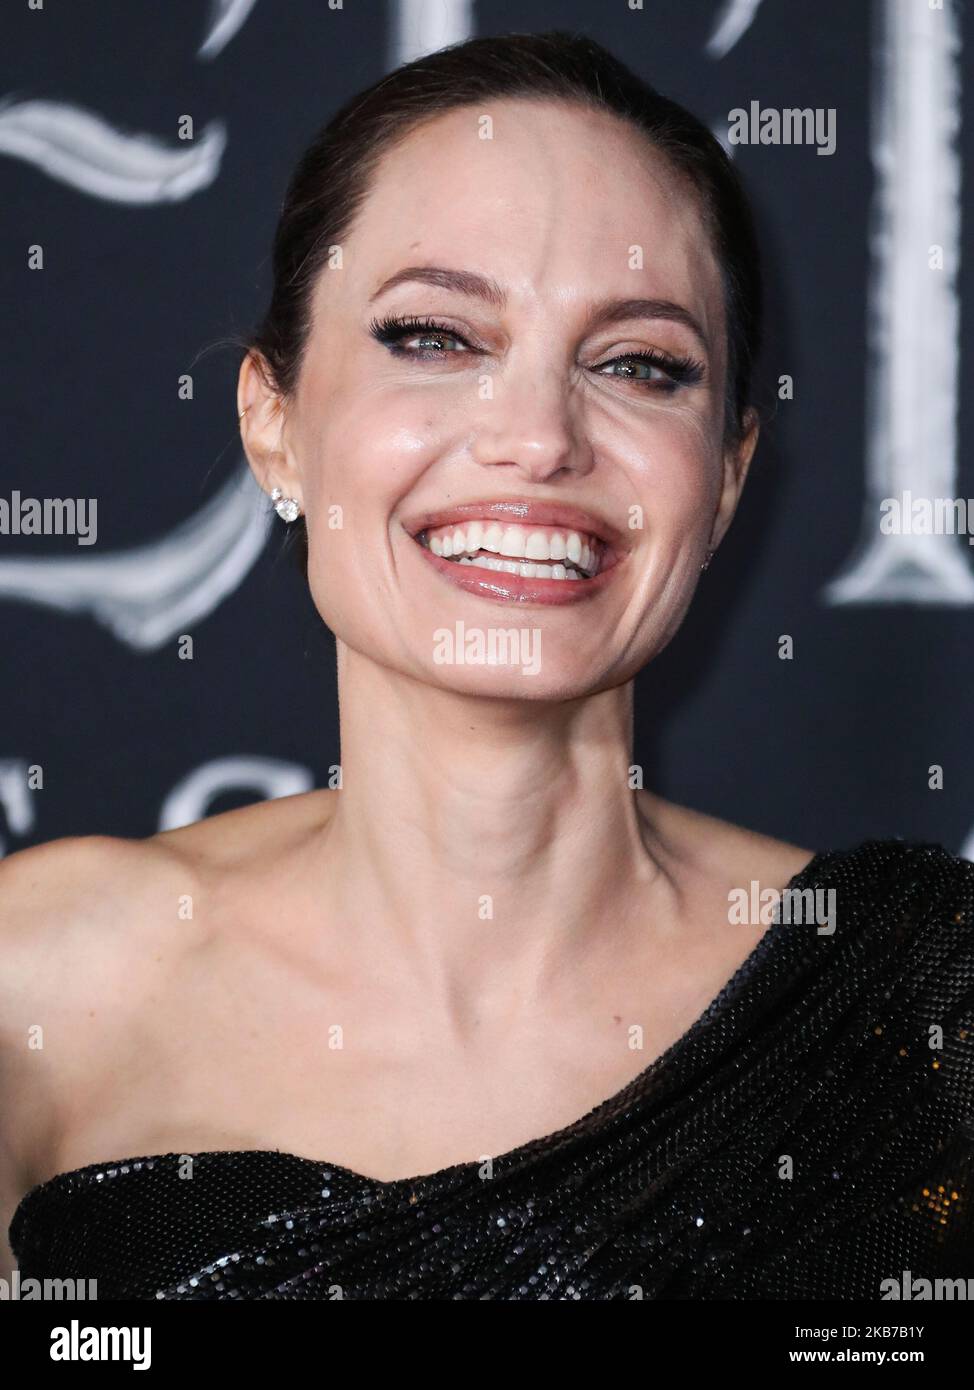 HOLLYWOOD, LOS ANGELES, CALIFORNIA, USA - SEPTEMBER 30: Actress Angelina Jolie wearing Atelier Versace with Cartier jewelry arrives at the World Premiere Of Disney's 'Maleficent: Mistress Of Evil' held at the El Capitan Theatre on September 30, 2019 in Hollywood, Los Angeles, California, United States. (Photo by Xavier Collin/Image Press Agency/NurPhoto) Stock Photo